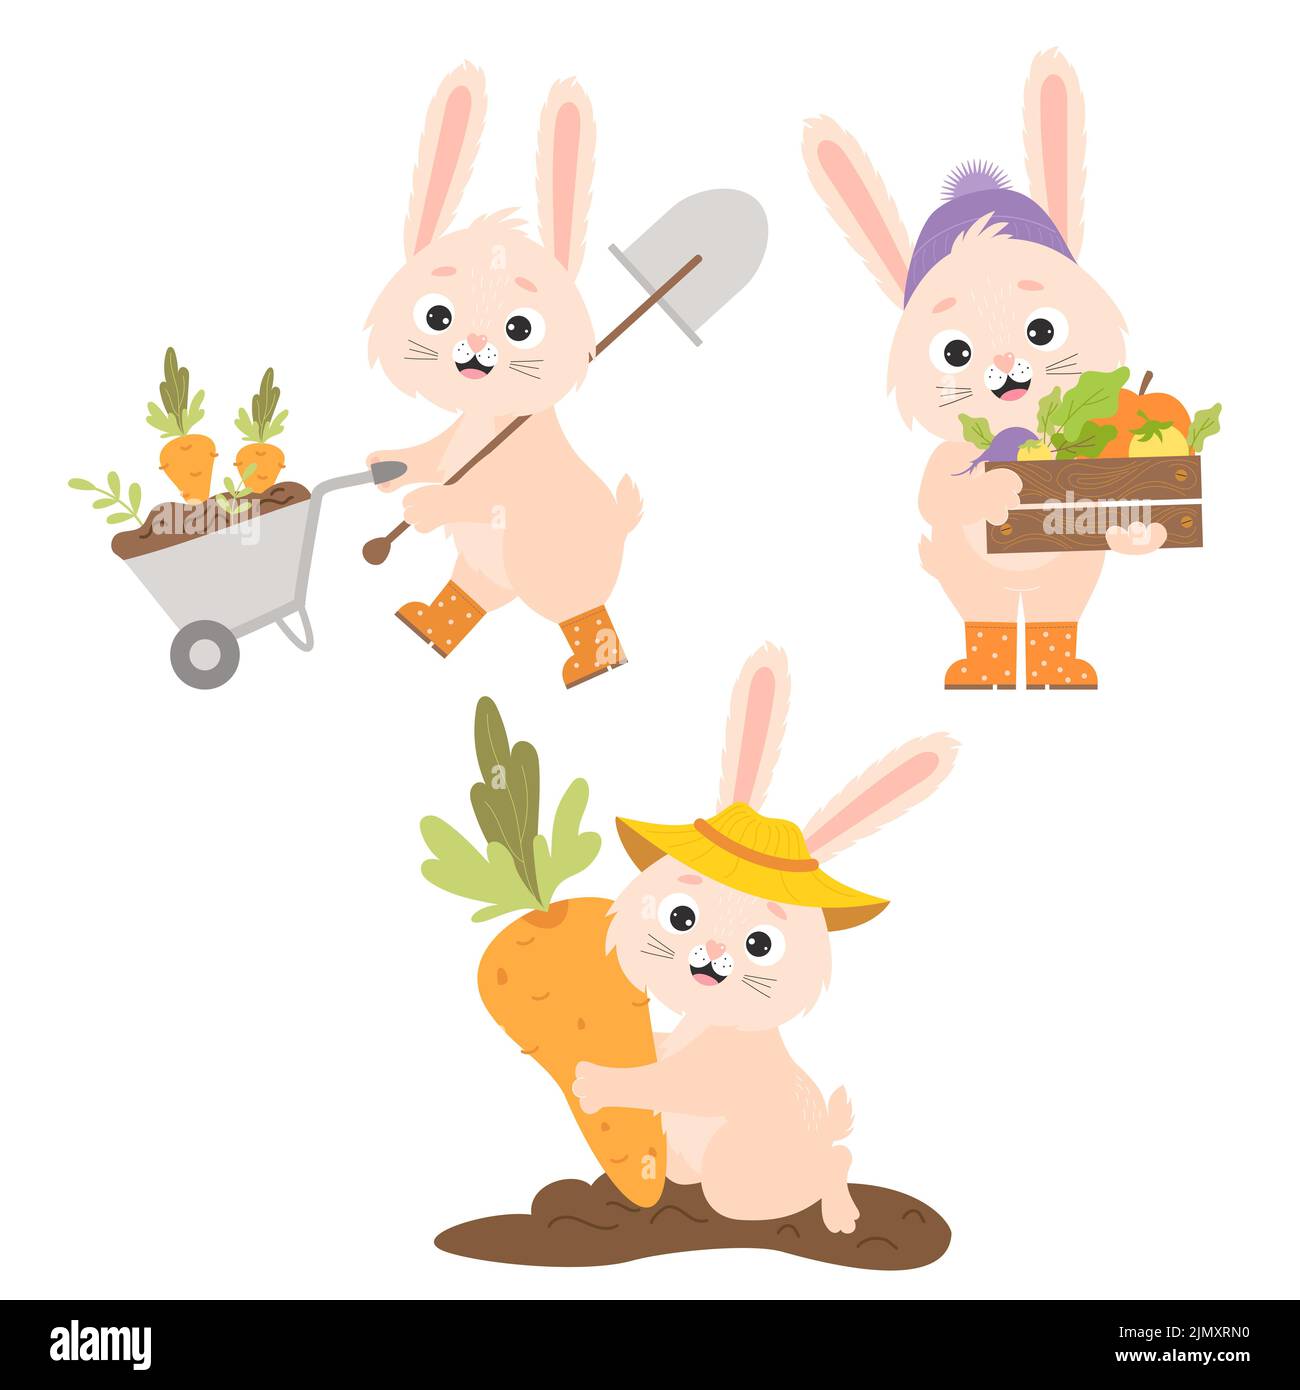 Collection of cartoon characters rabbit farmers. Cute bunny in rubber boots with crop, with garden wheelbarrow and shovel, collects carrots from garde Stock Vector